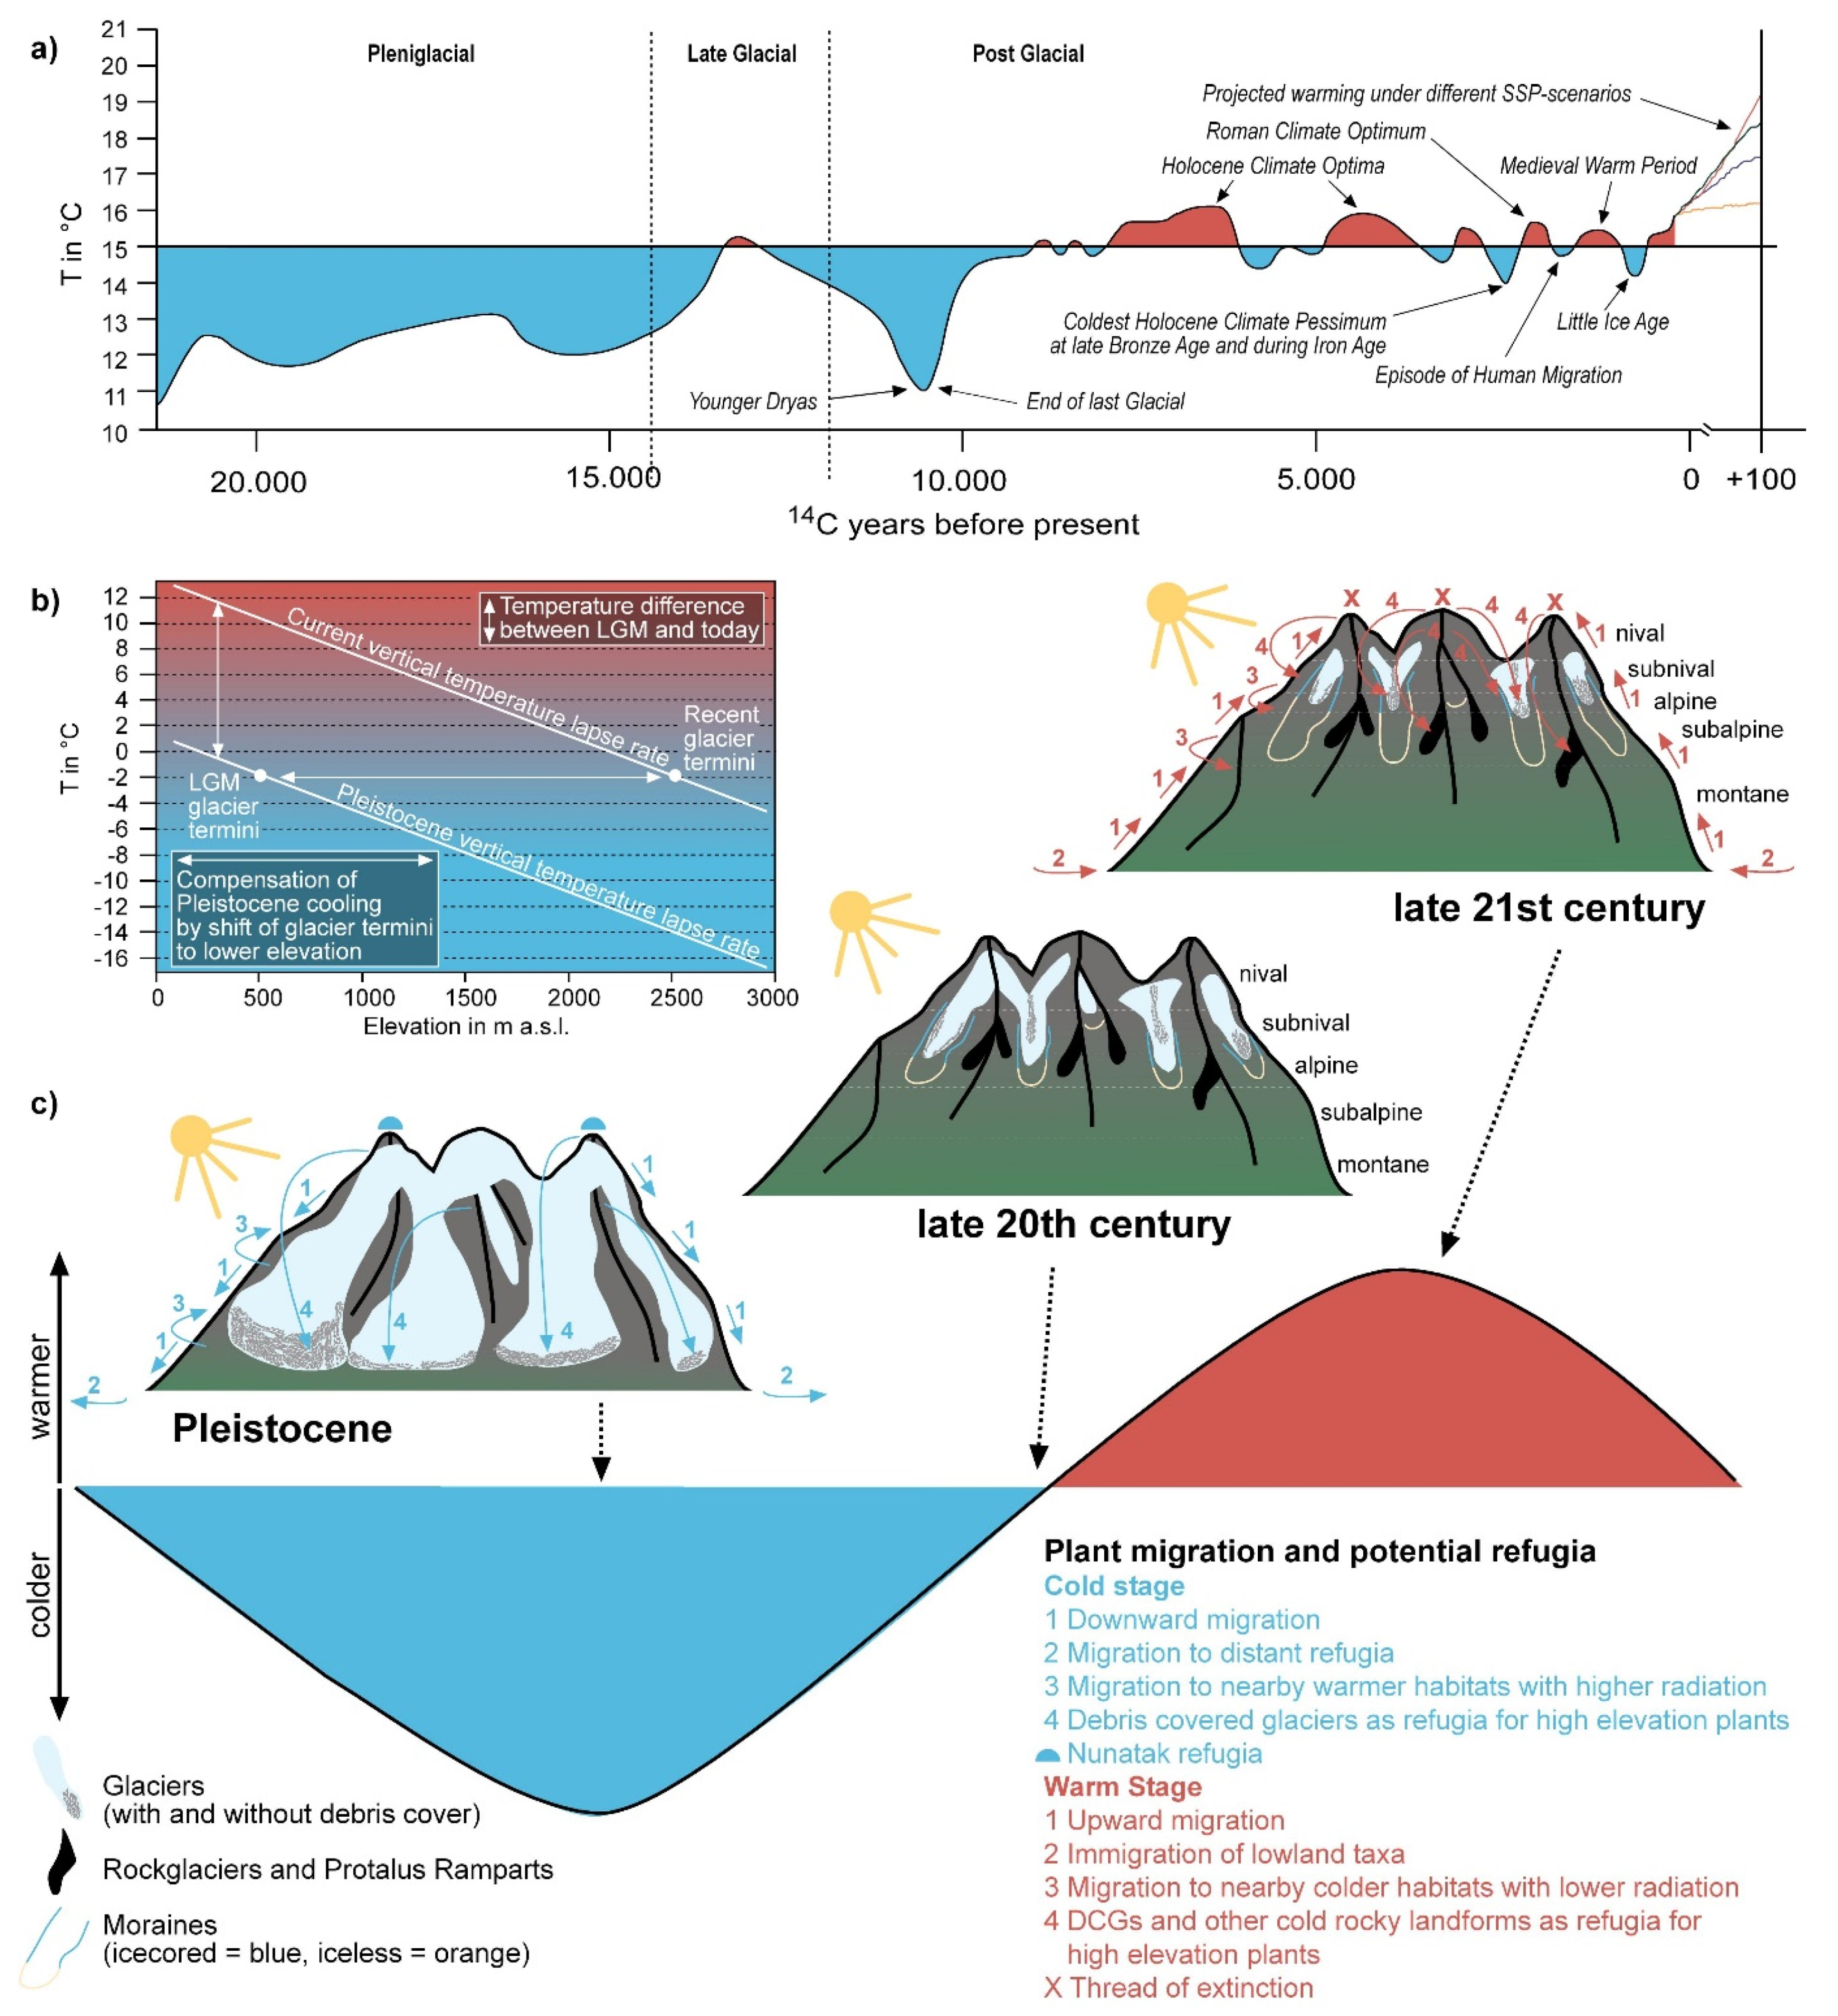 Diversity | Free Full-Text | Vegetation Ecology of Debris-Covered Glaciers  (DCGs)&mdash;Site Conditions, Vegetation Patterns and Implications for DCGs  Serving as Quaternary Cold- and Warm-Stage Plant Refugia | HTML